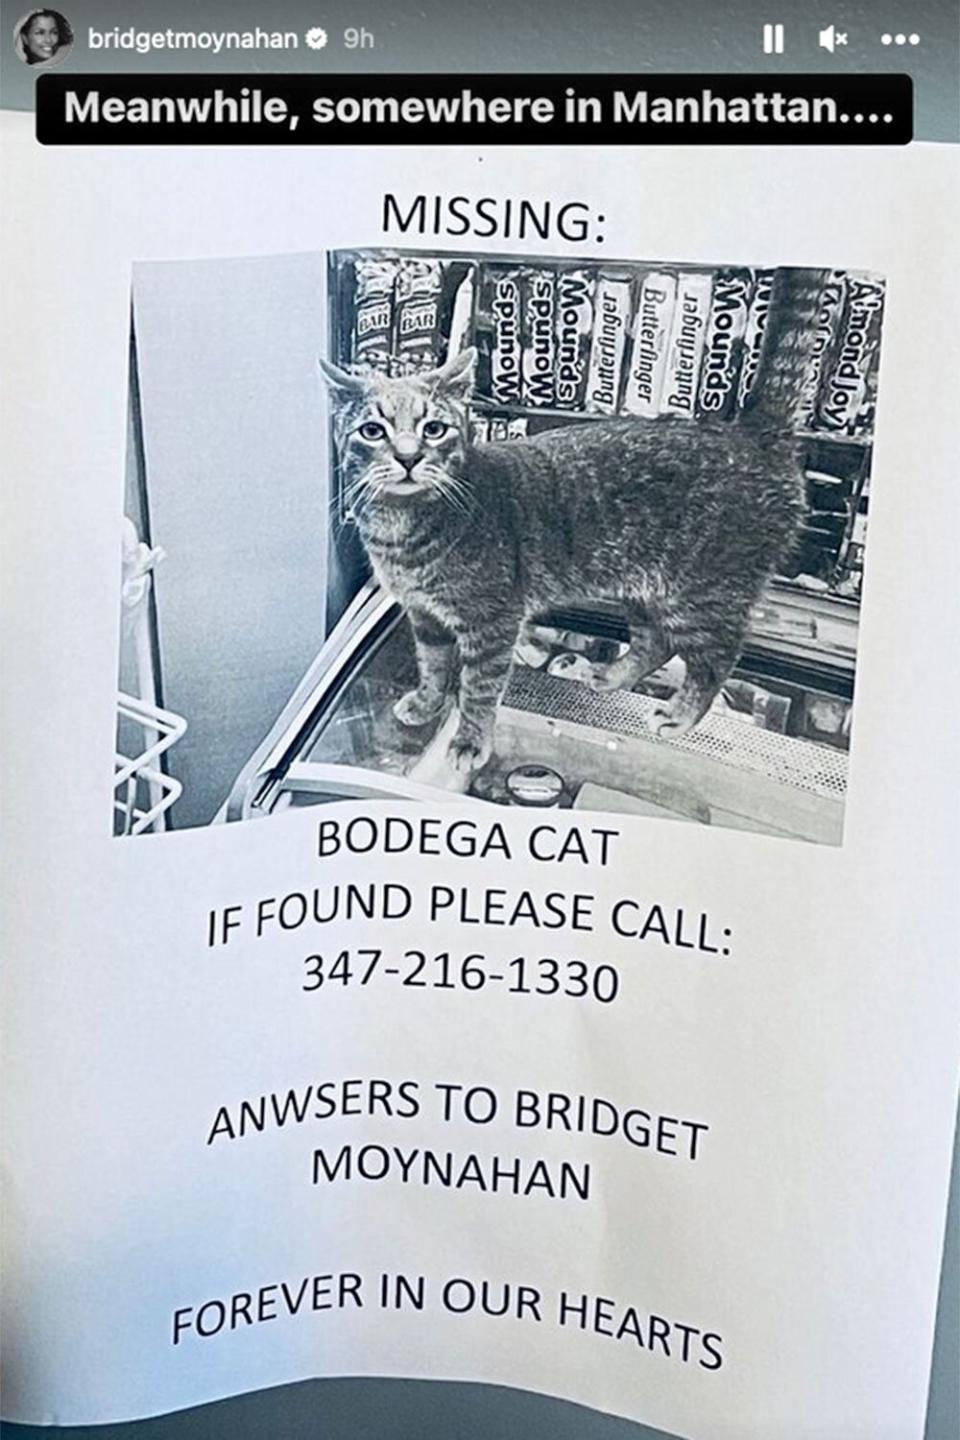 Bridget Moynahan posted on her Instagram story a photo of a missing cat flyer of a cat that is called "Bridget Moynahan."  https://www.instagram.com/stories/bridgetmoynahan/3014899209799737453/?hl=en